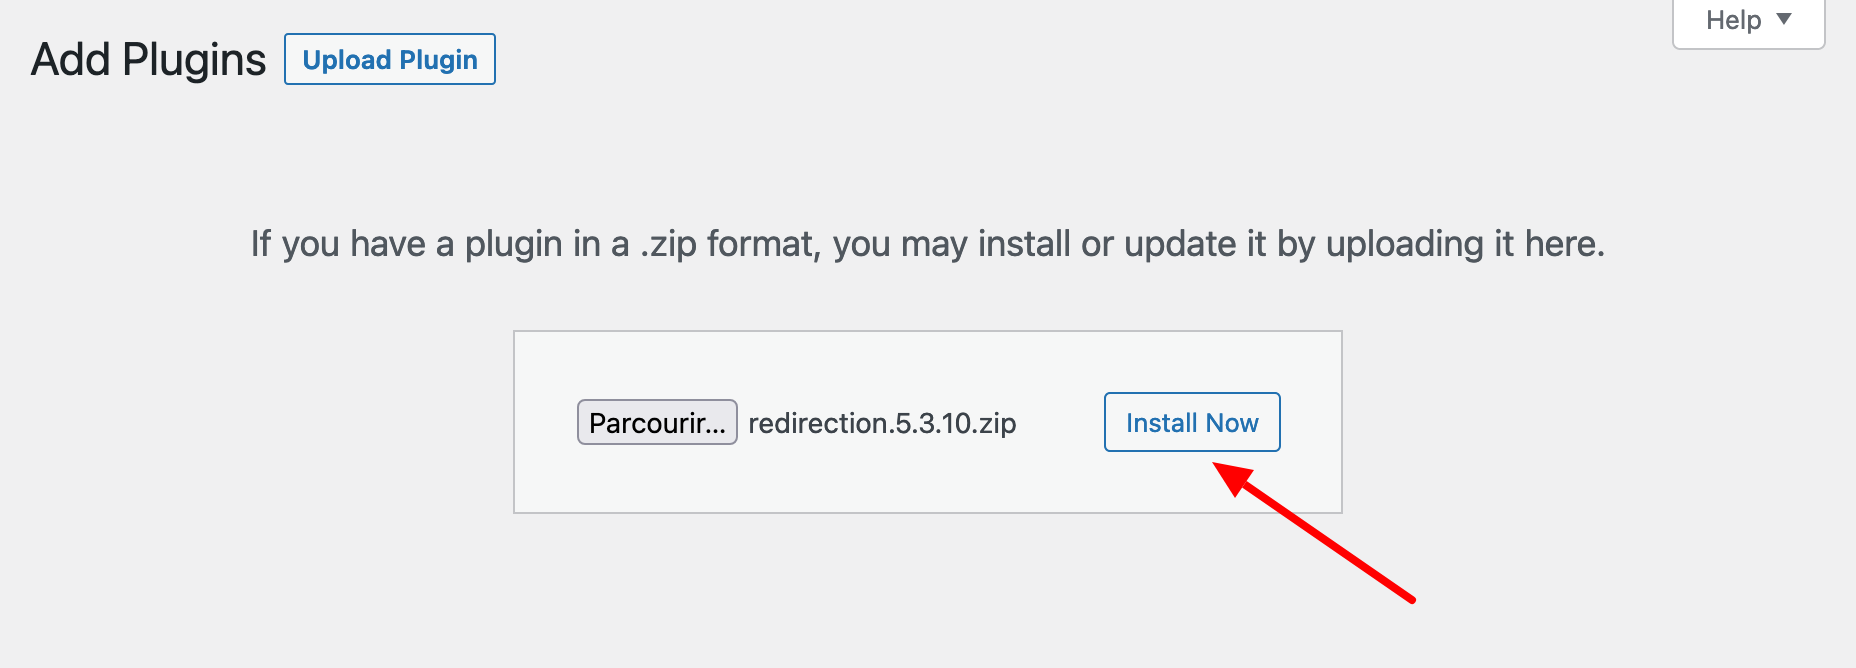 Plugins in a zip file format can be uploaded directly to WordPress.